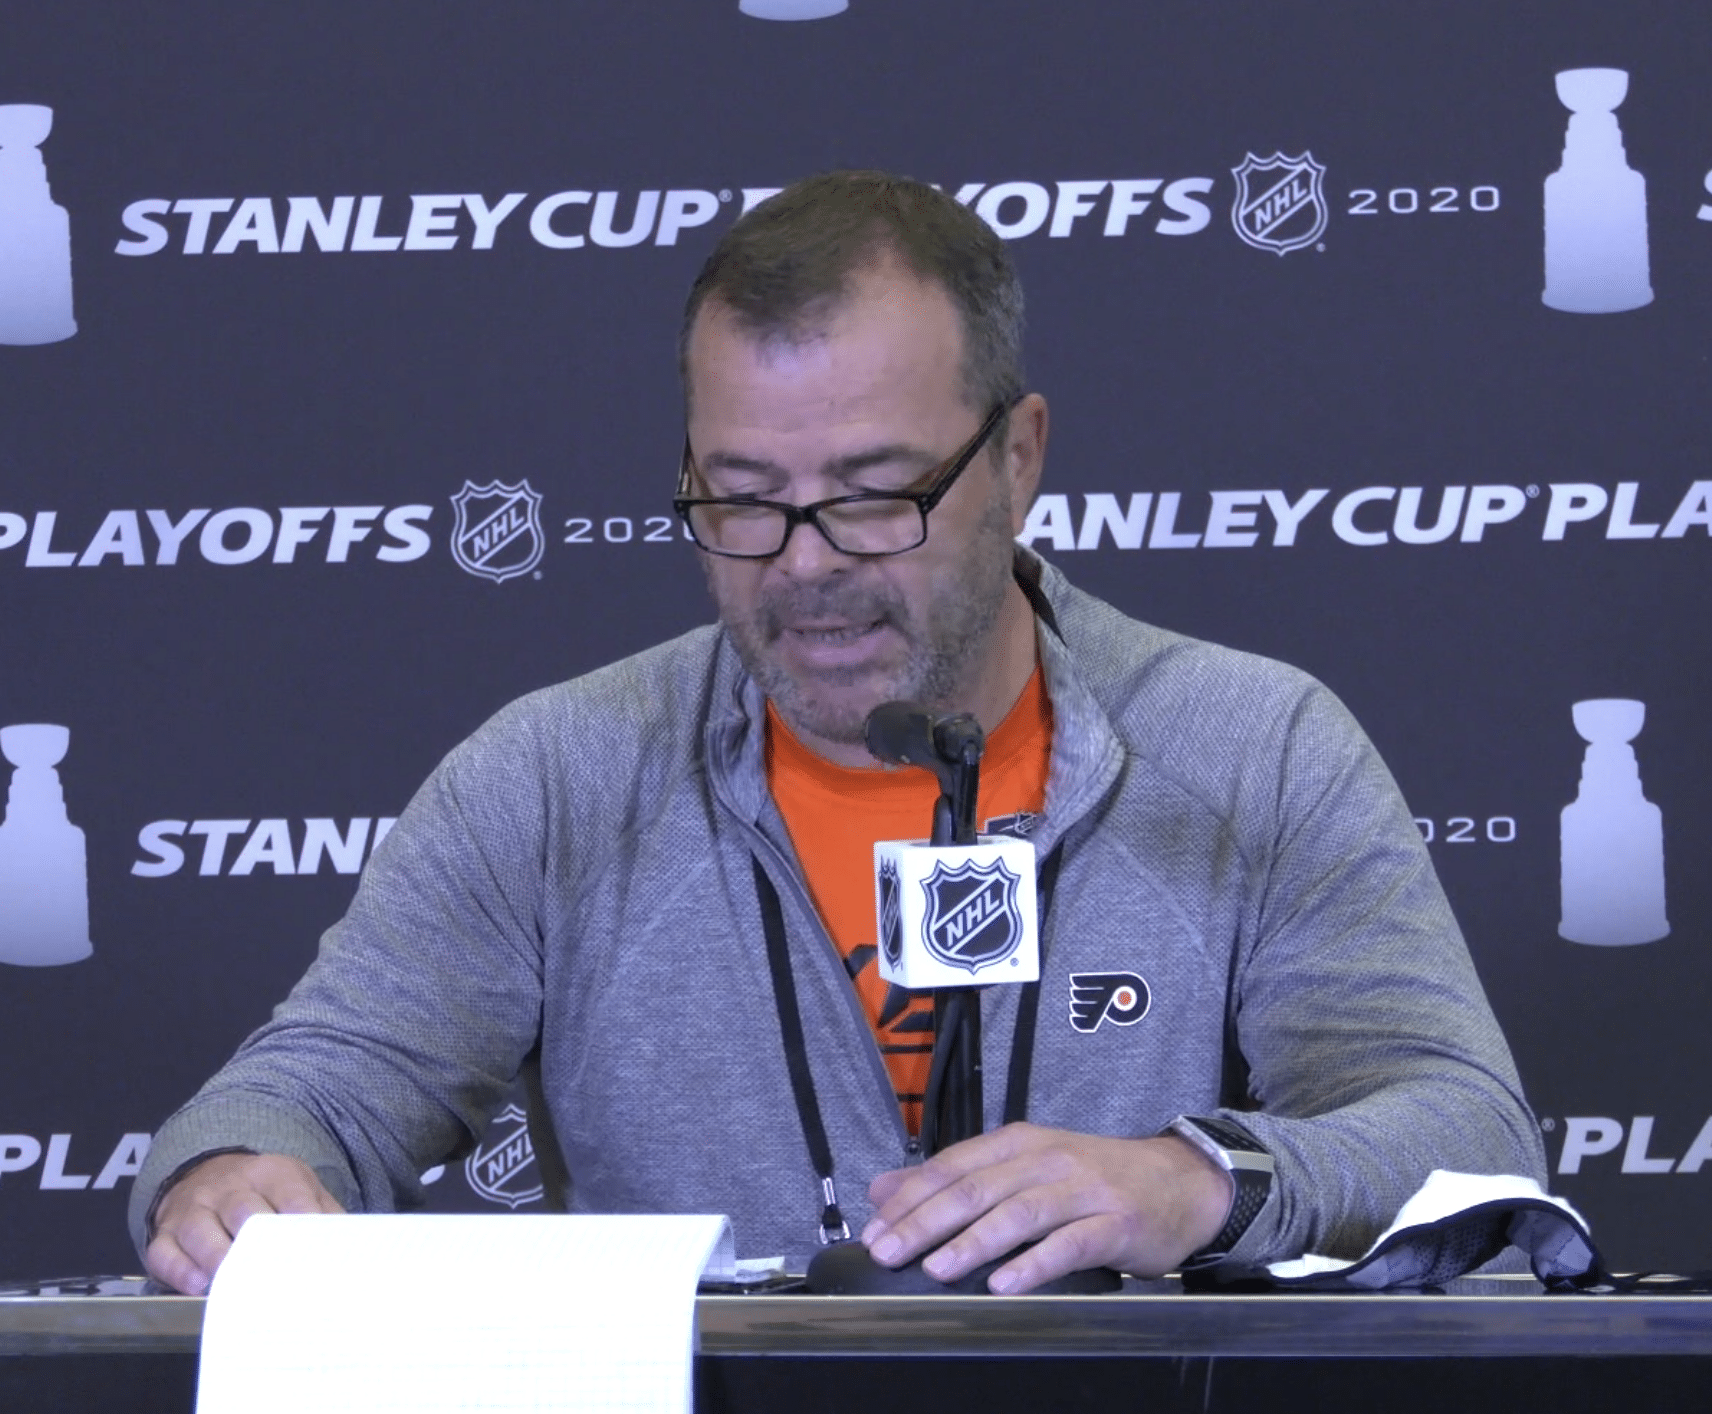 Alain Vigneault Defends His Integrity, Tells Critics to Be Good to One Another